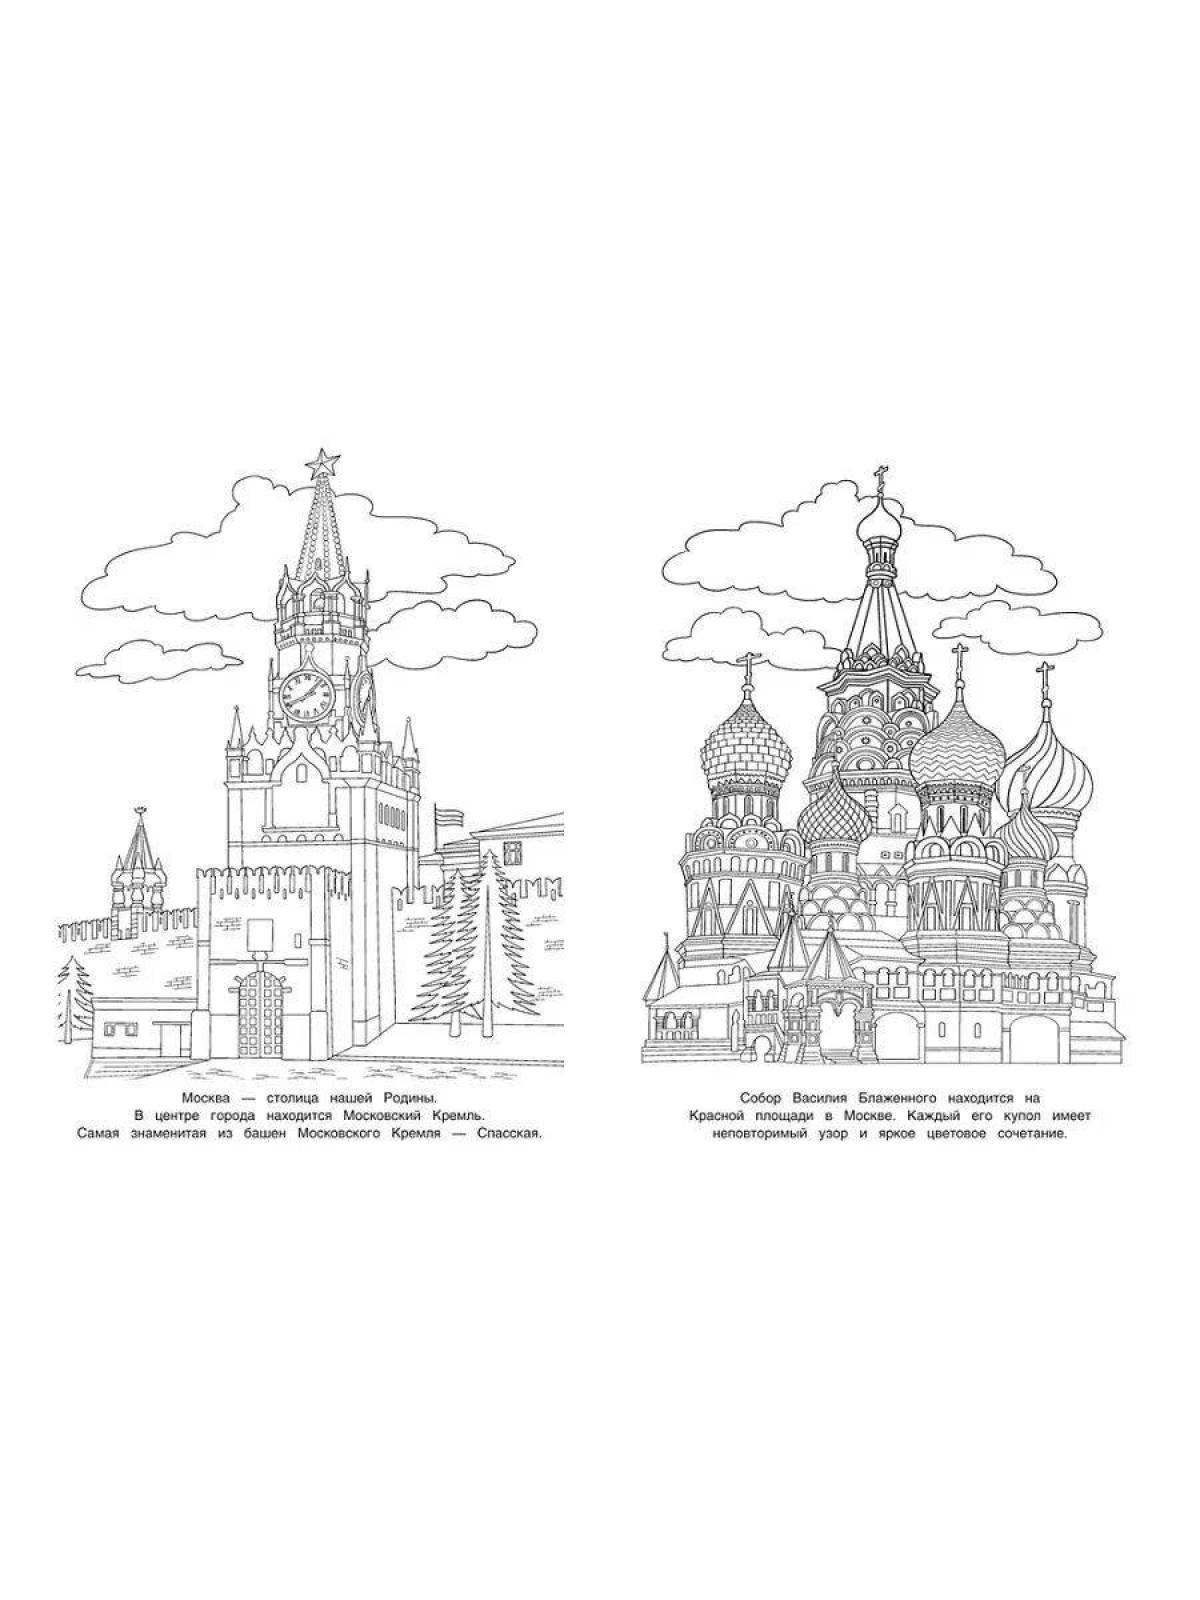 Royal coloring of sights of Russia